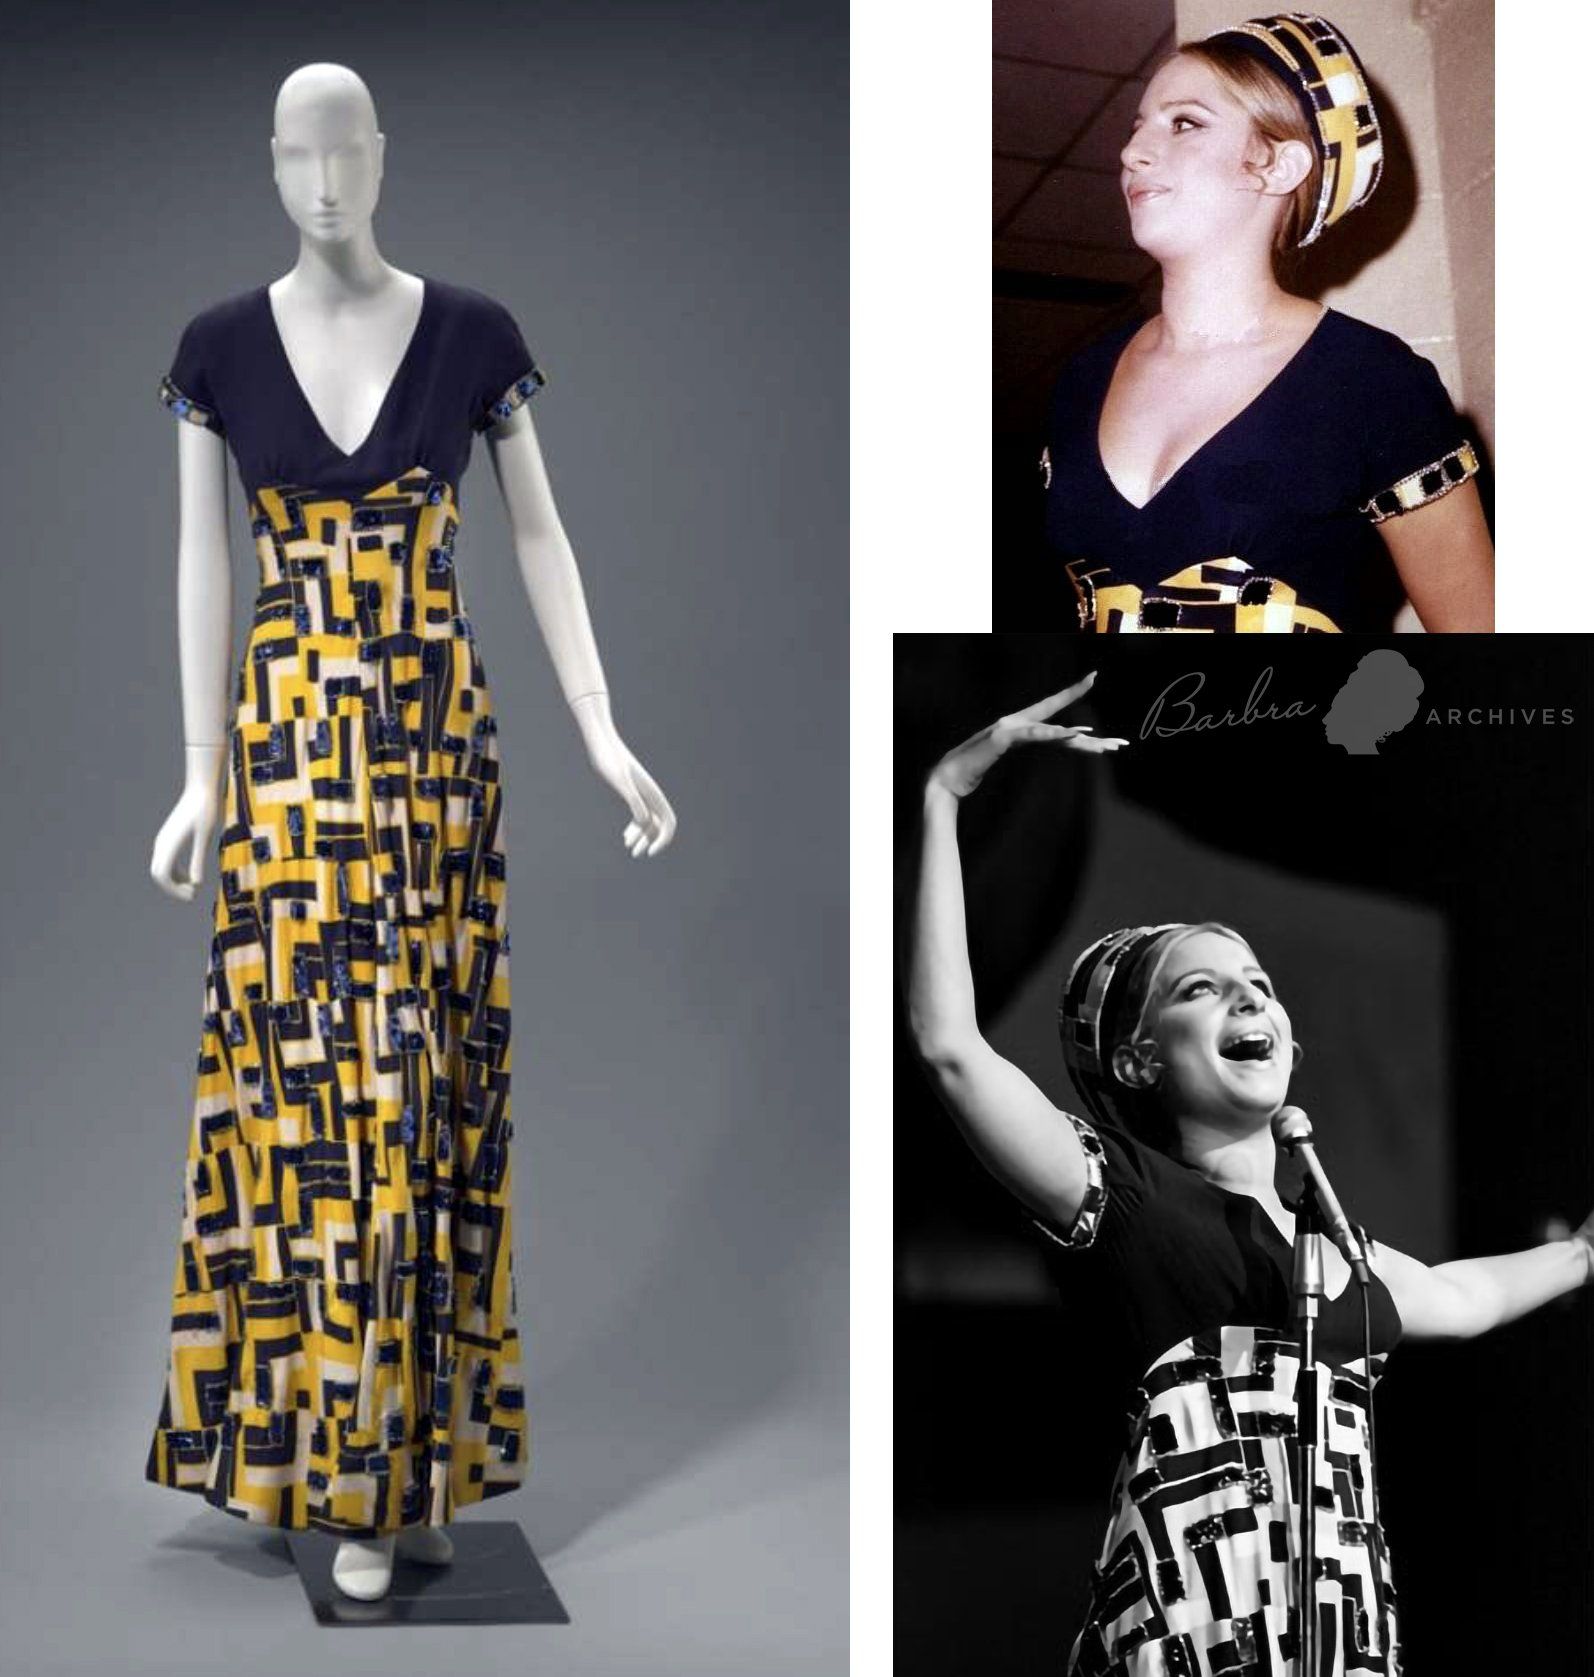 Photos of the blue and yellow gown worn by Streisand and designed by Scaasi